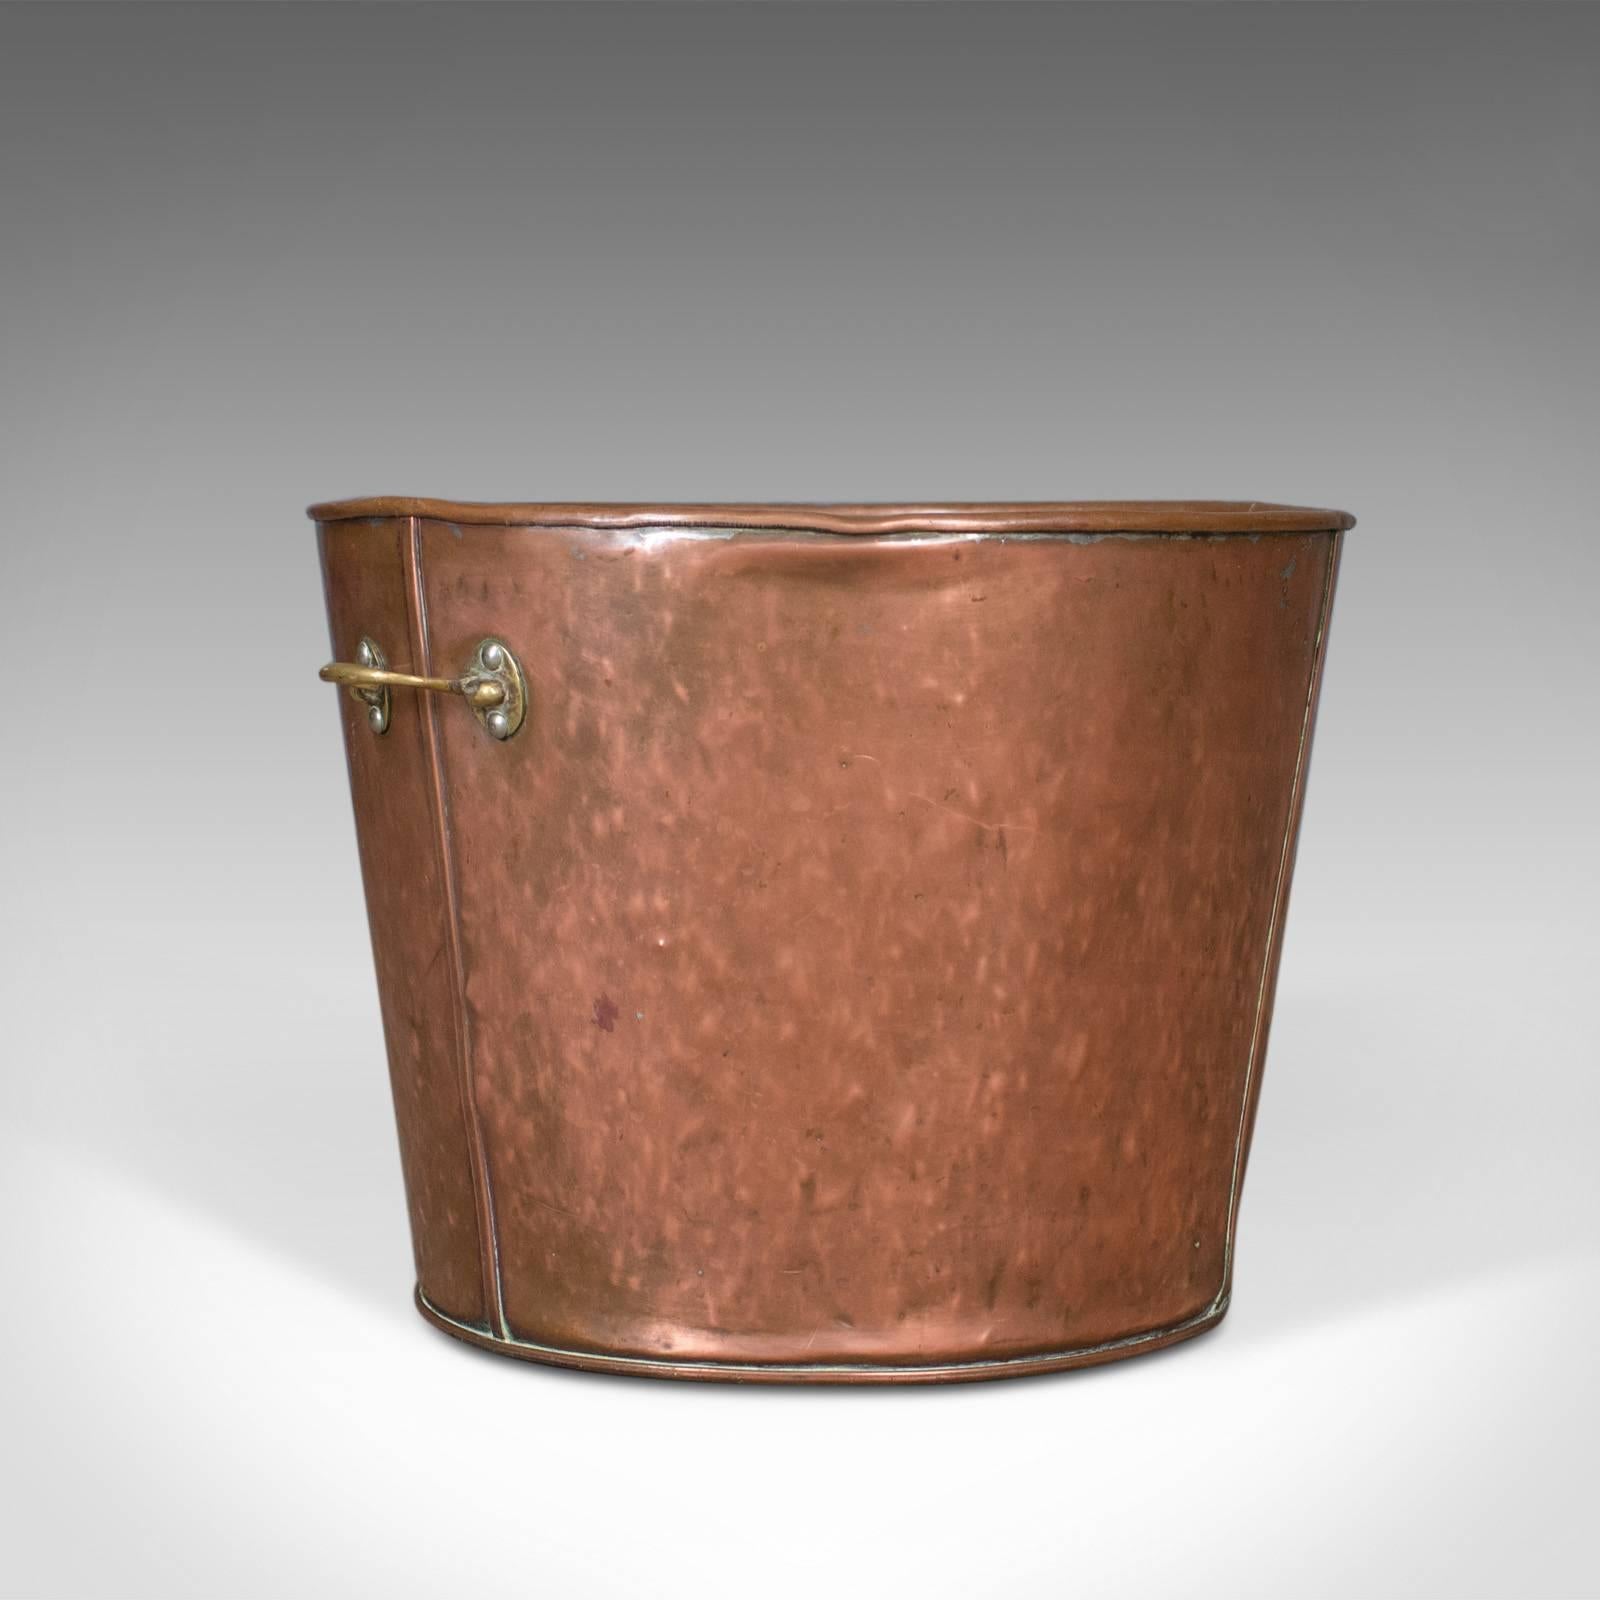 This is a large antique log bin, an English fireside scuttle in coppered finish dating to circa 1900.

A pleasing fireside storage bin presented in good antique condition
Suitable for coal, logs and kindling or helpful when removing